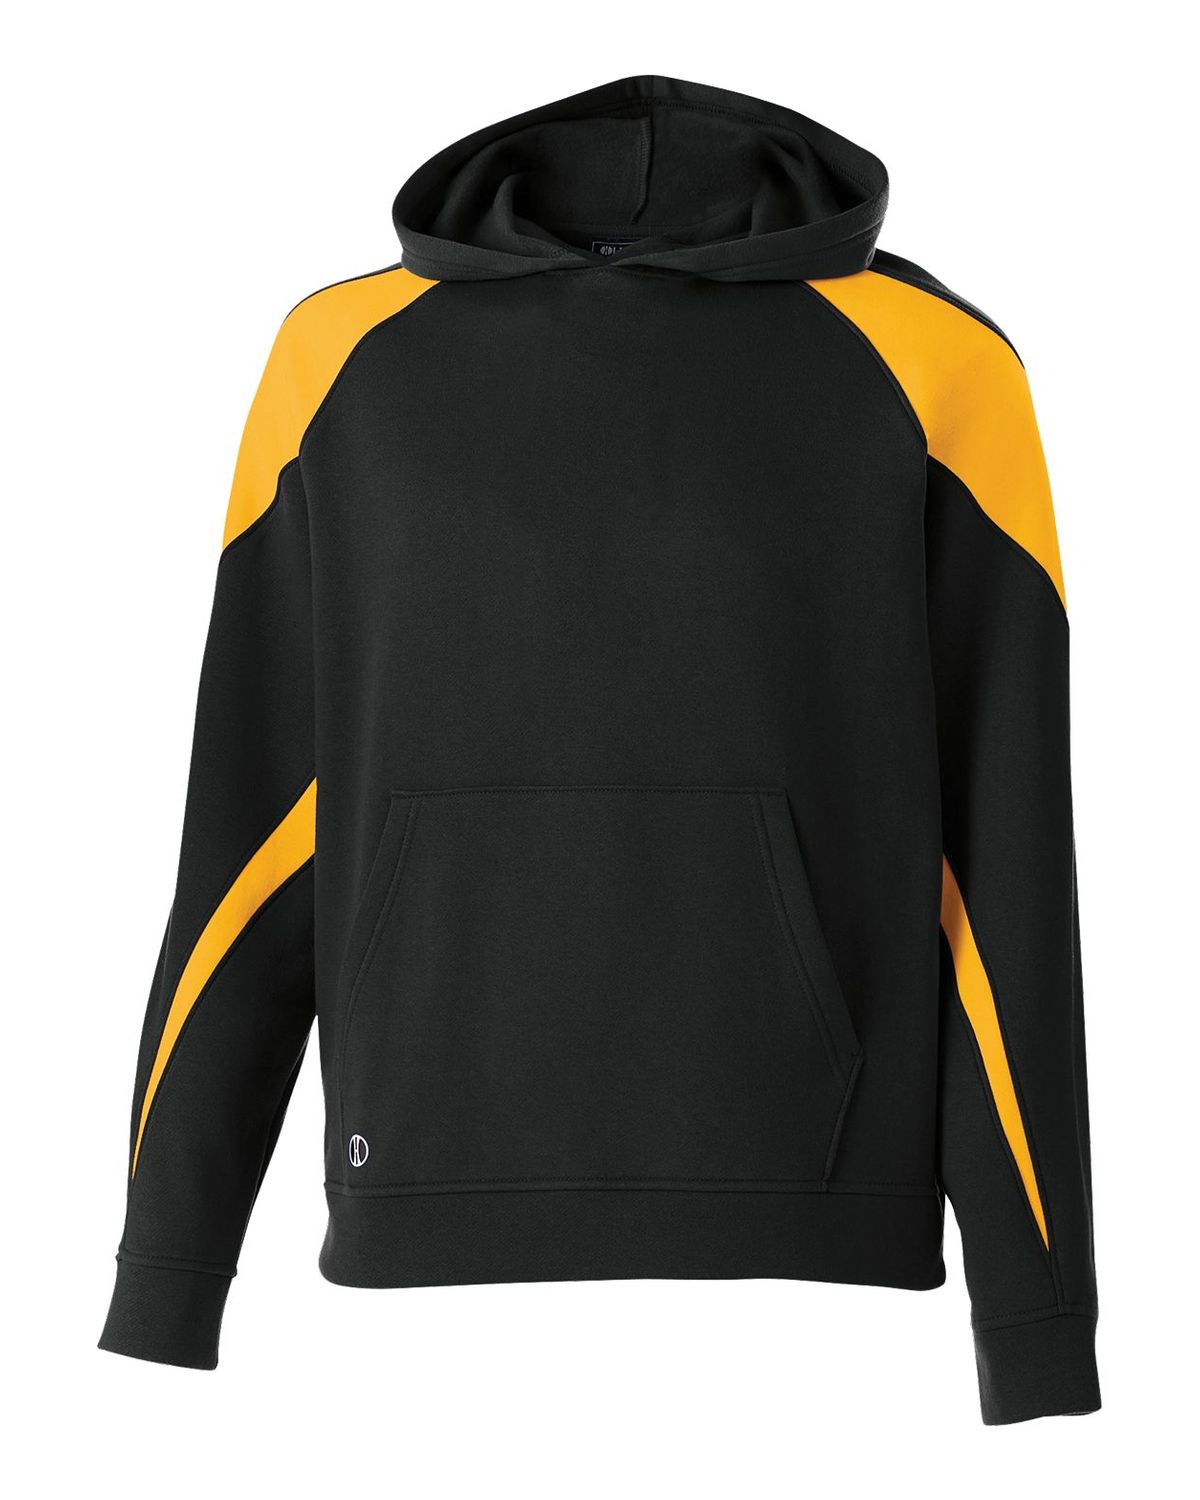 'Holloway 229646 Youth Prospect Hoodie'